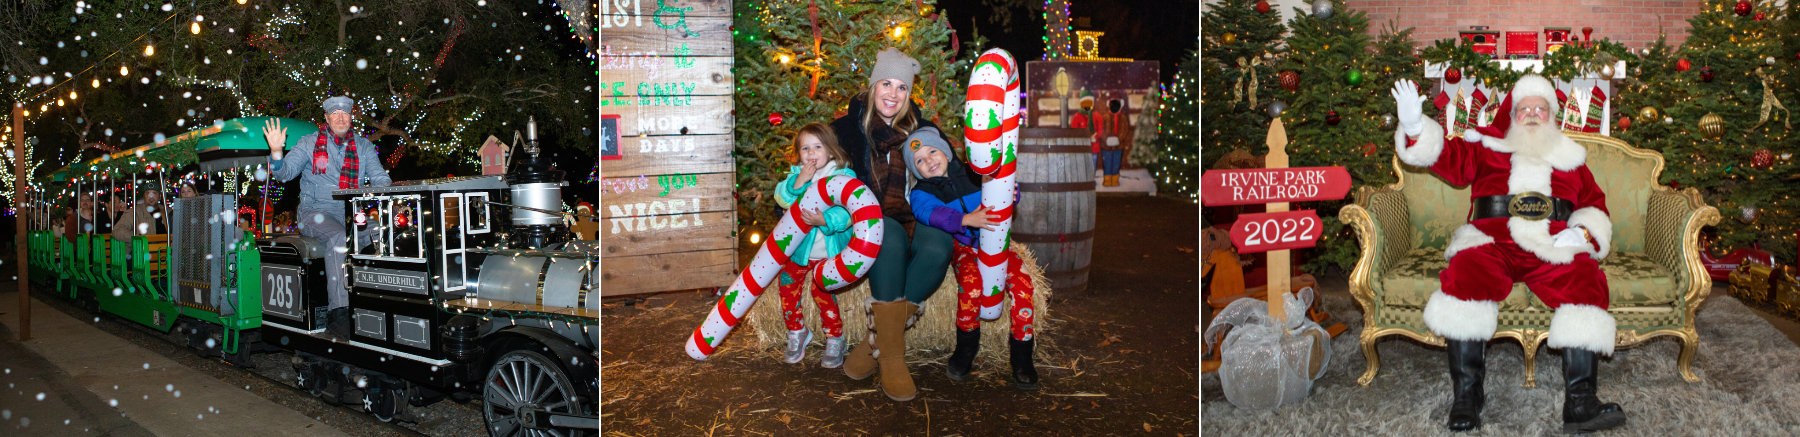 holiday events at irvine park railroad